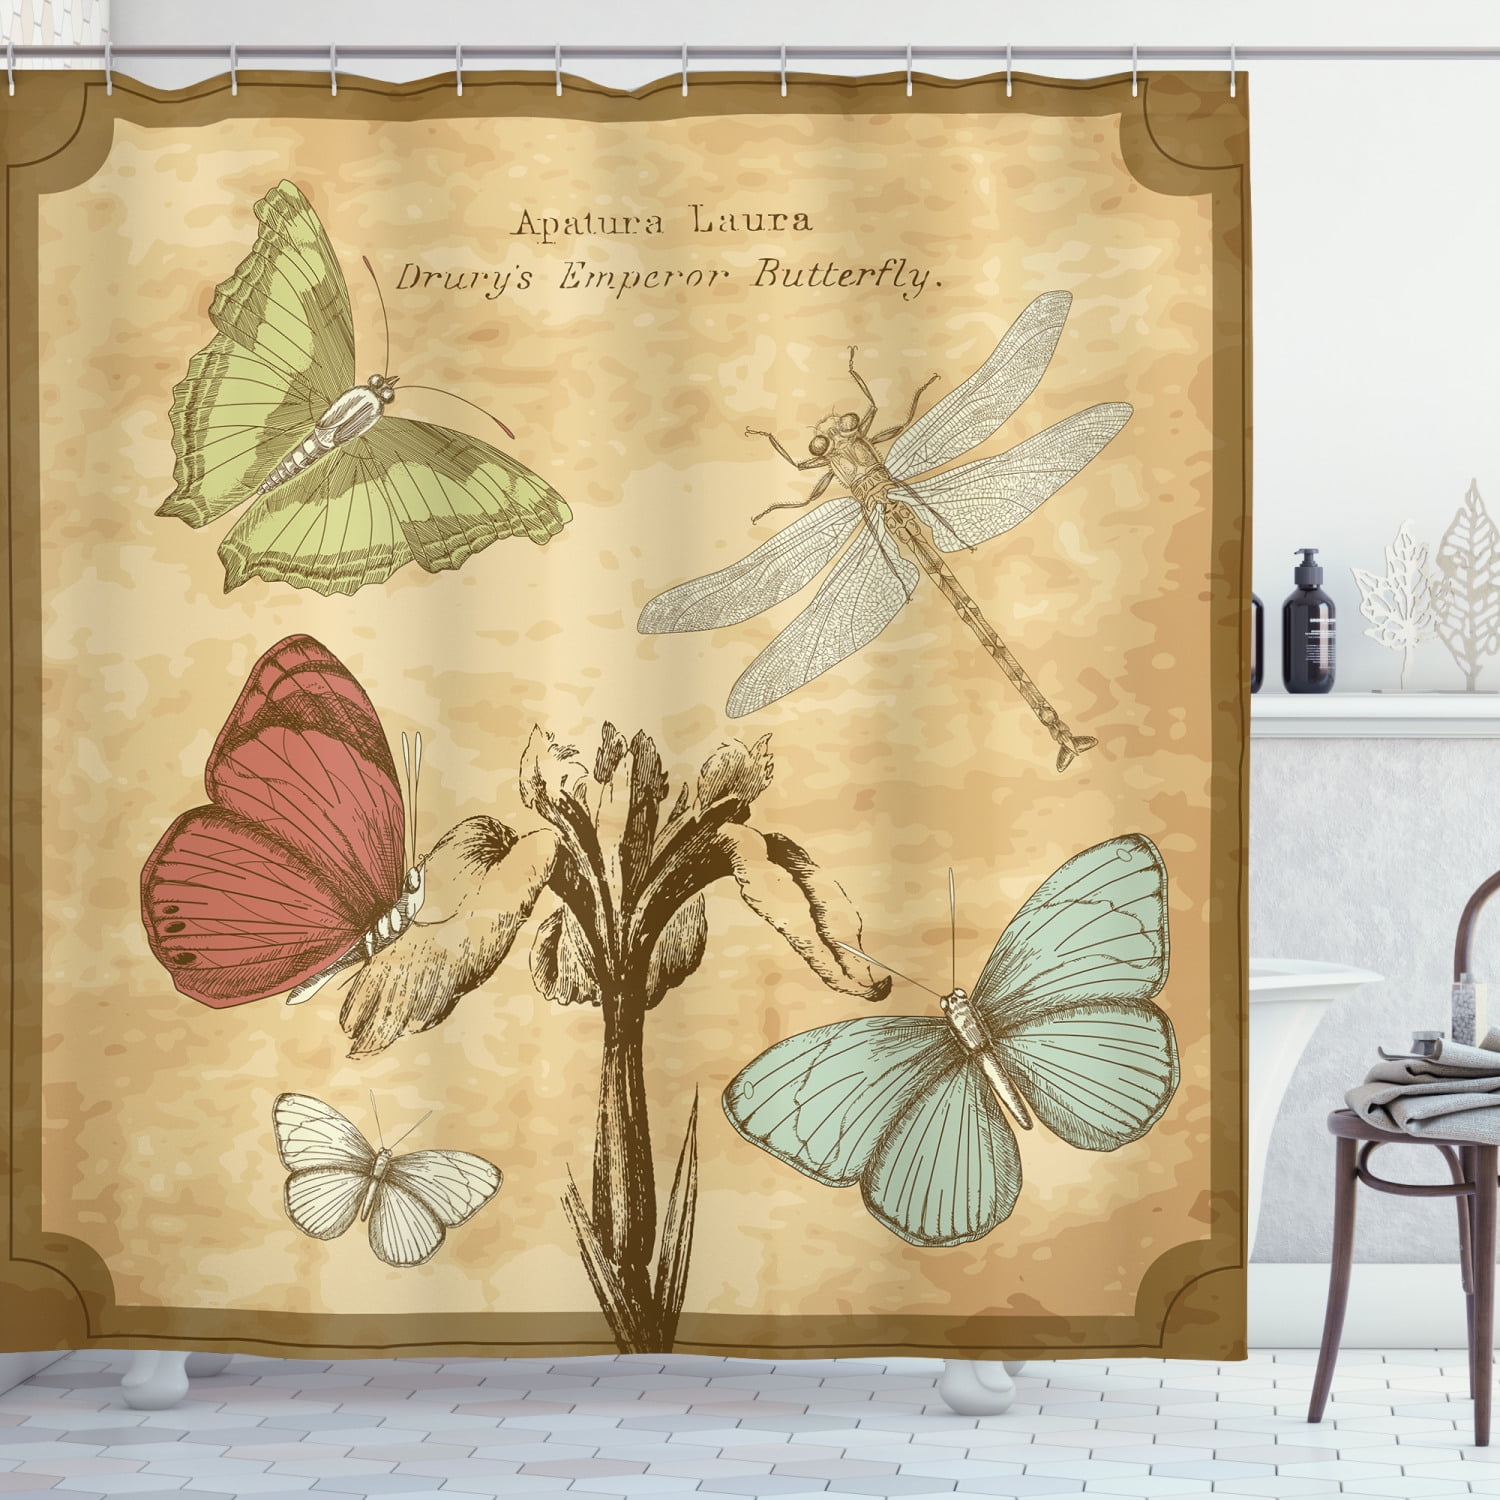 Insect Theme Bee Butterfly Dragonfly Shower Curtain Set Bath Waterproof Fabric 